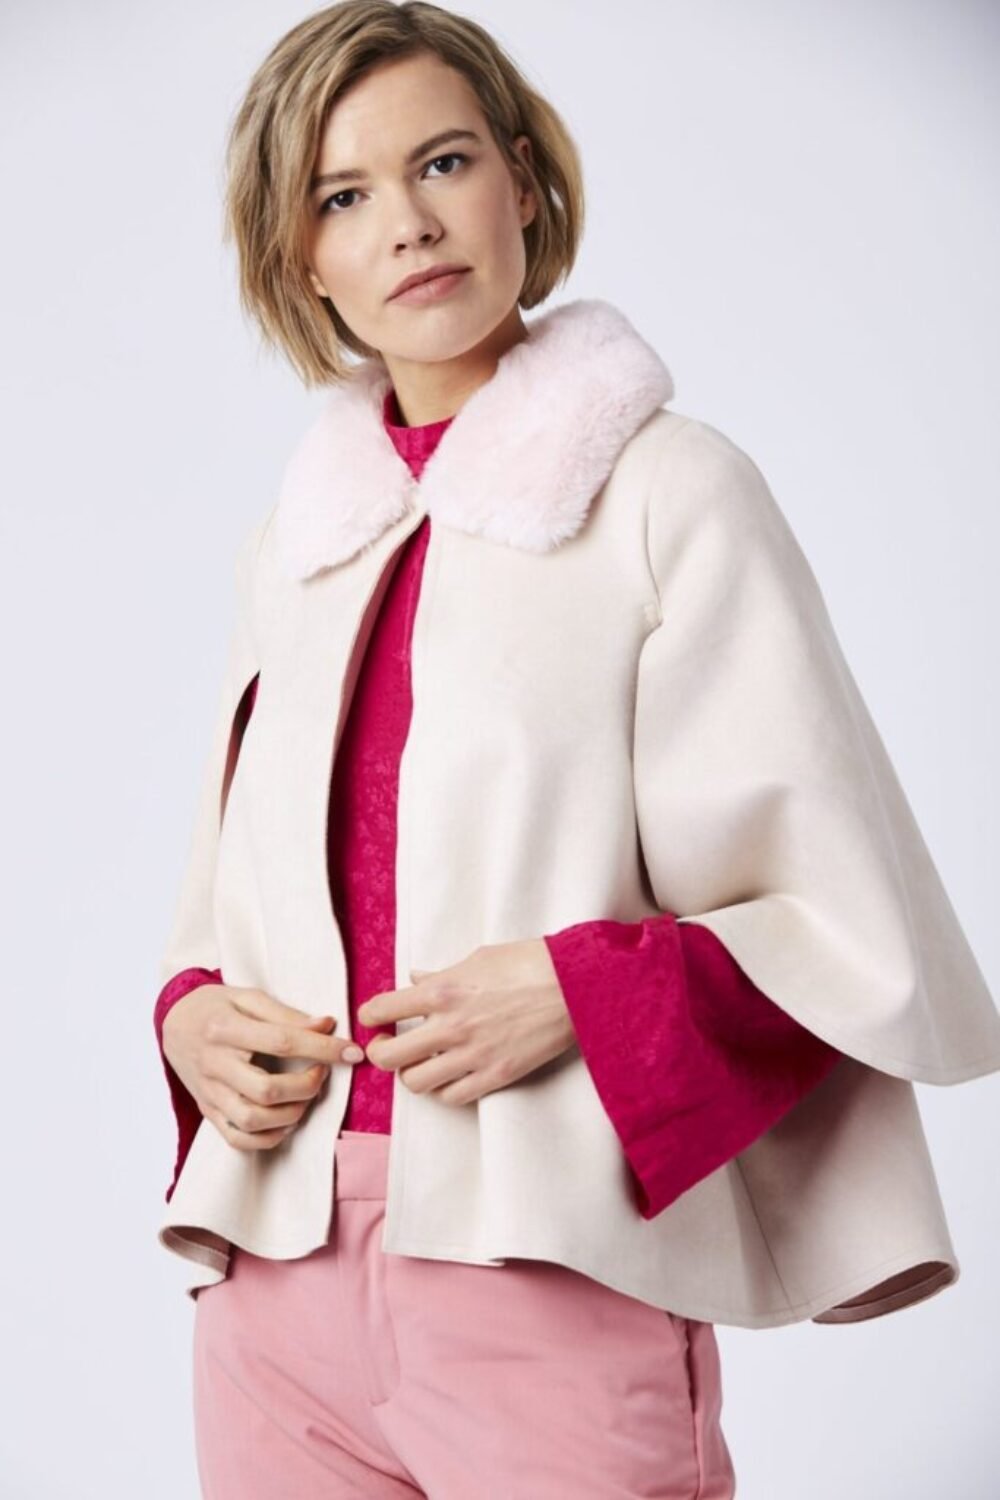 Shop Lux Pink Faux Fur and Faux Suede Cape Jacket and women's luxury and designer clothes at www.lux-apparel.co.uk